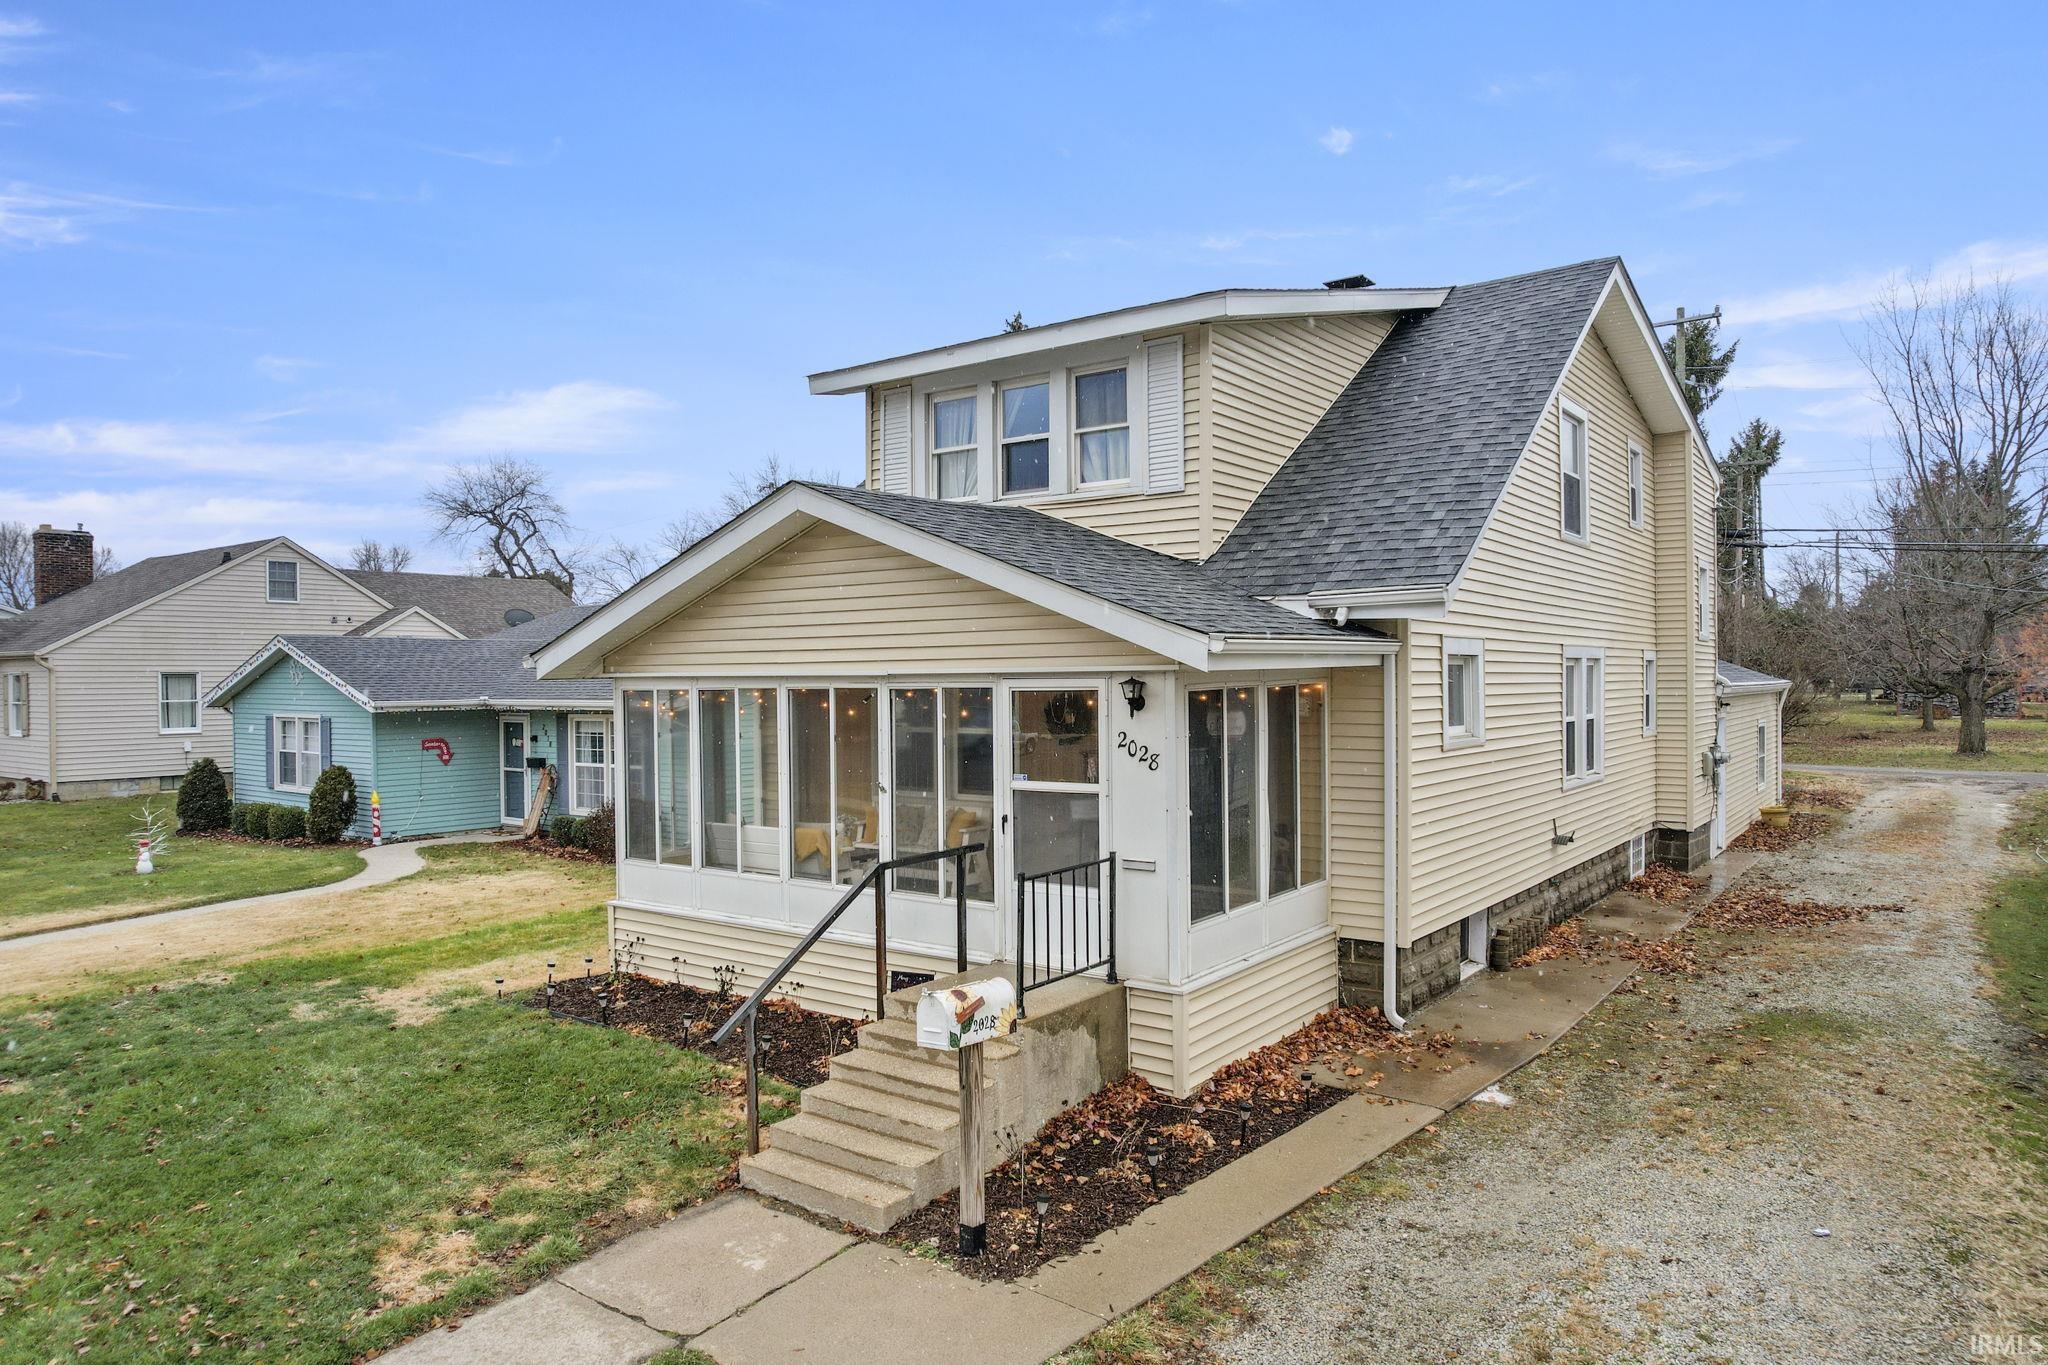 2028 College, Huntington, Indiana 46750, 4 Bedrooms Bedrooms, 9 Rooms Rooms,3 BathroomsBathrooms,Residential,For Sale,College,202249870